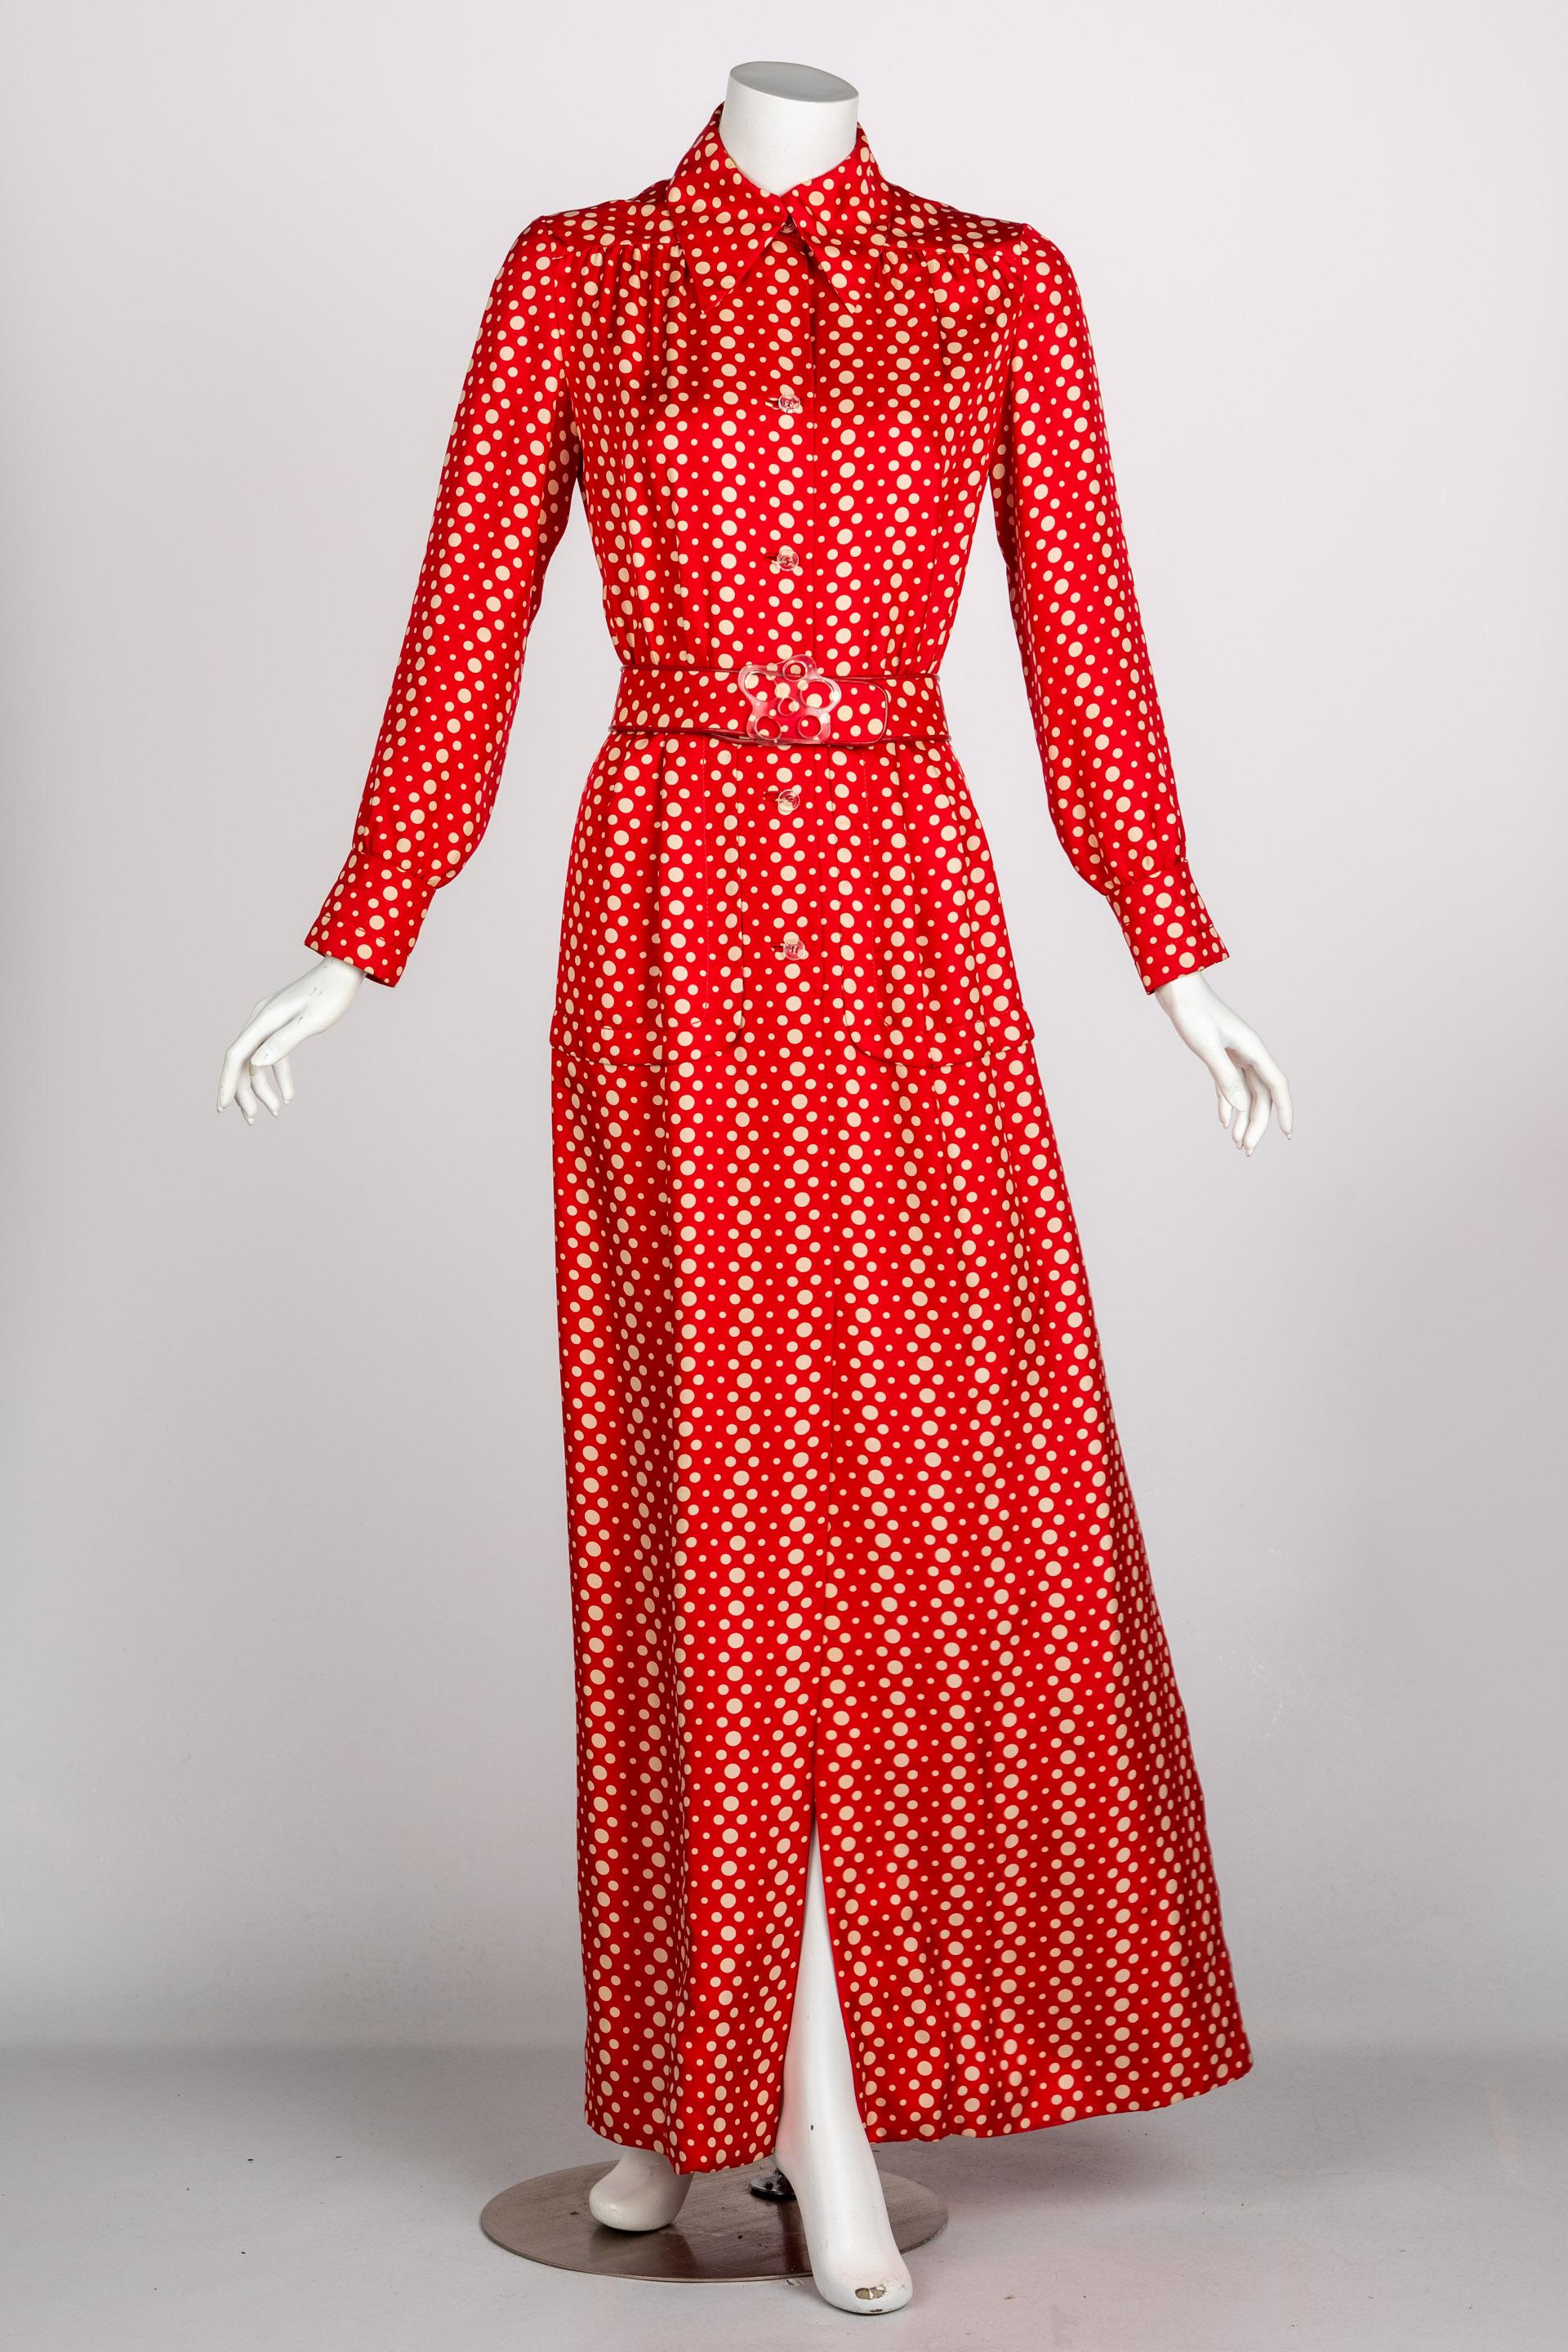 Women's Galanos Red Polka Dot Lucite Belted Silk Maxi Dress, 1970s For Sale